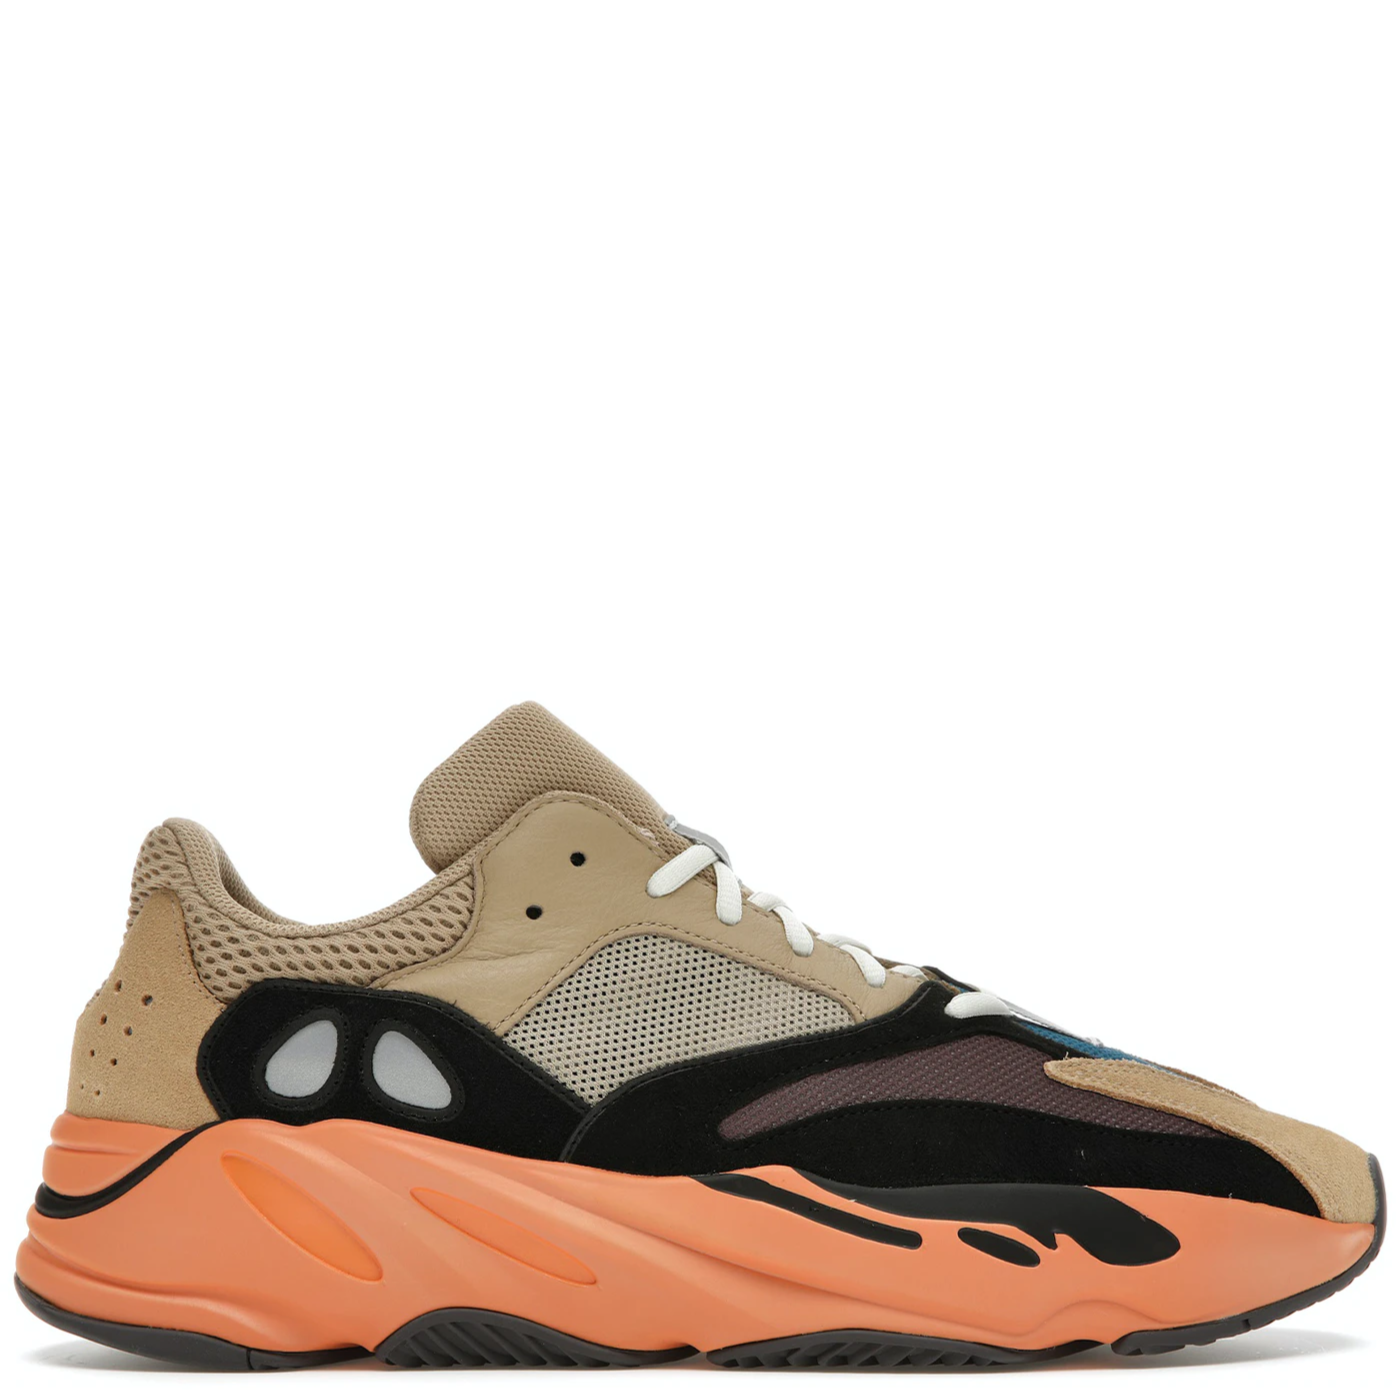 YEEZY BOOST 700 ENFLAME AMBER